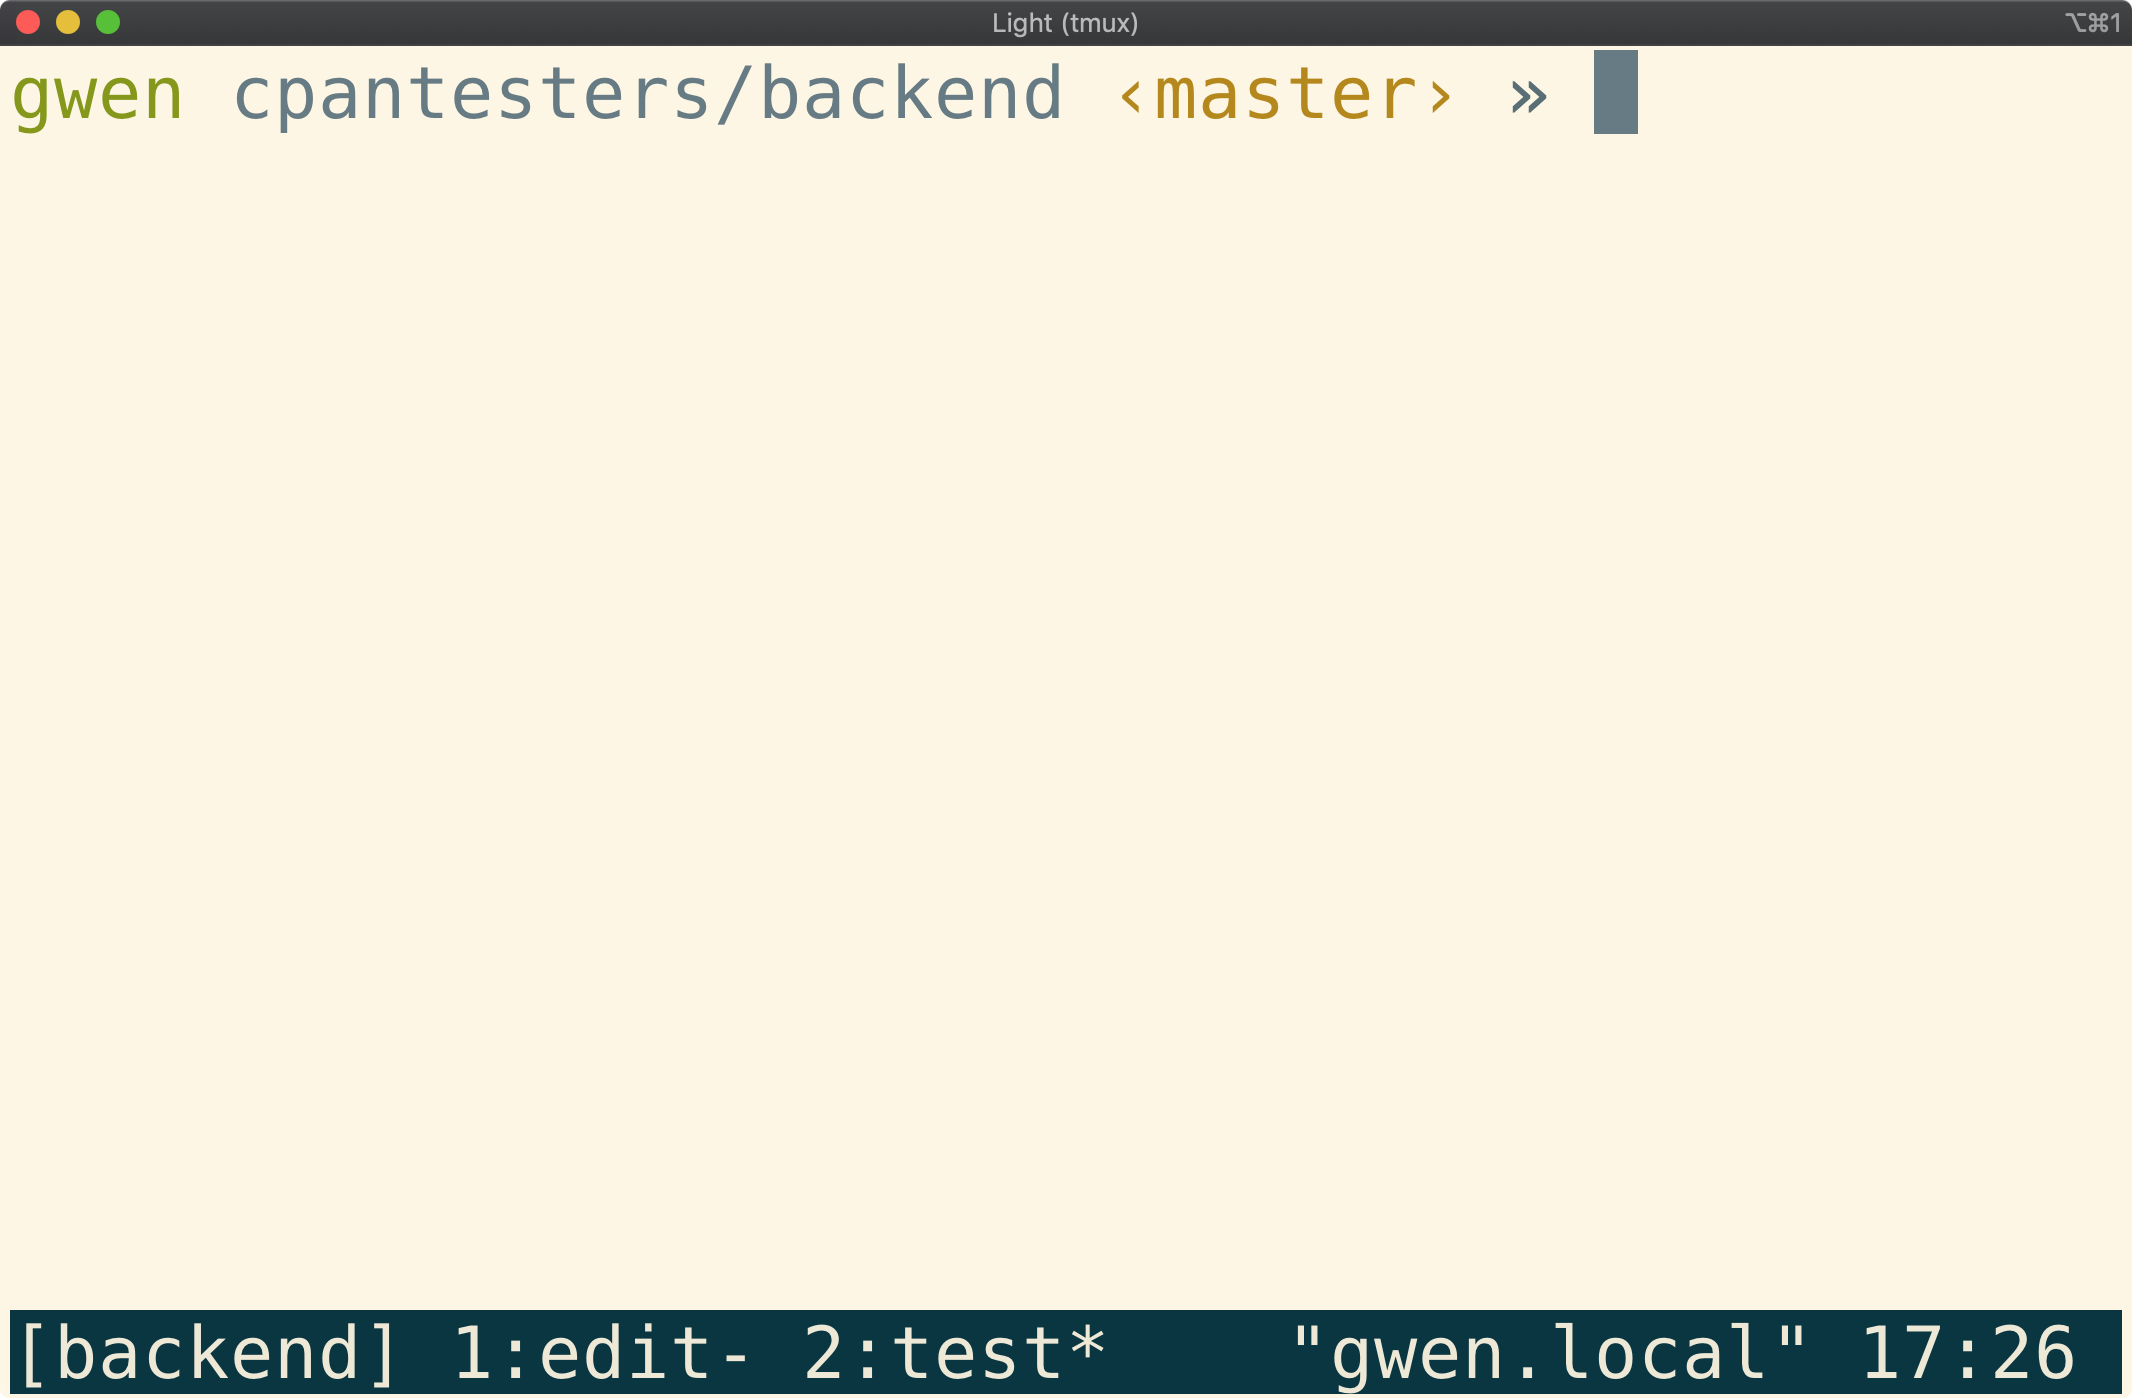 tmux session named "backend" with one window named "edit", and another
named "test"